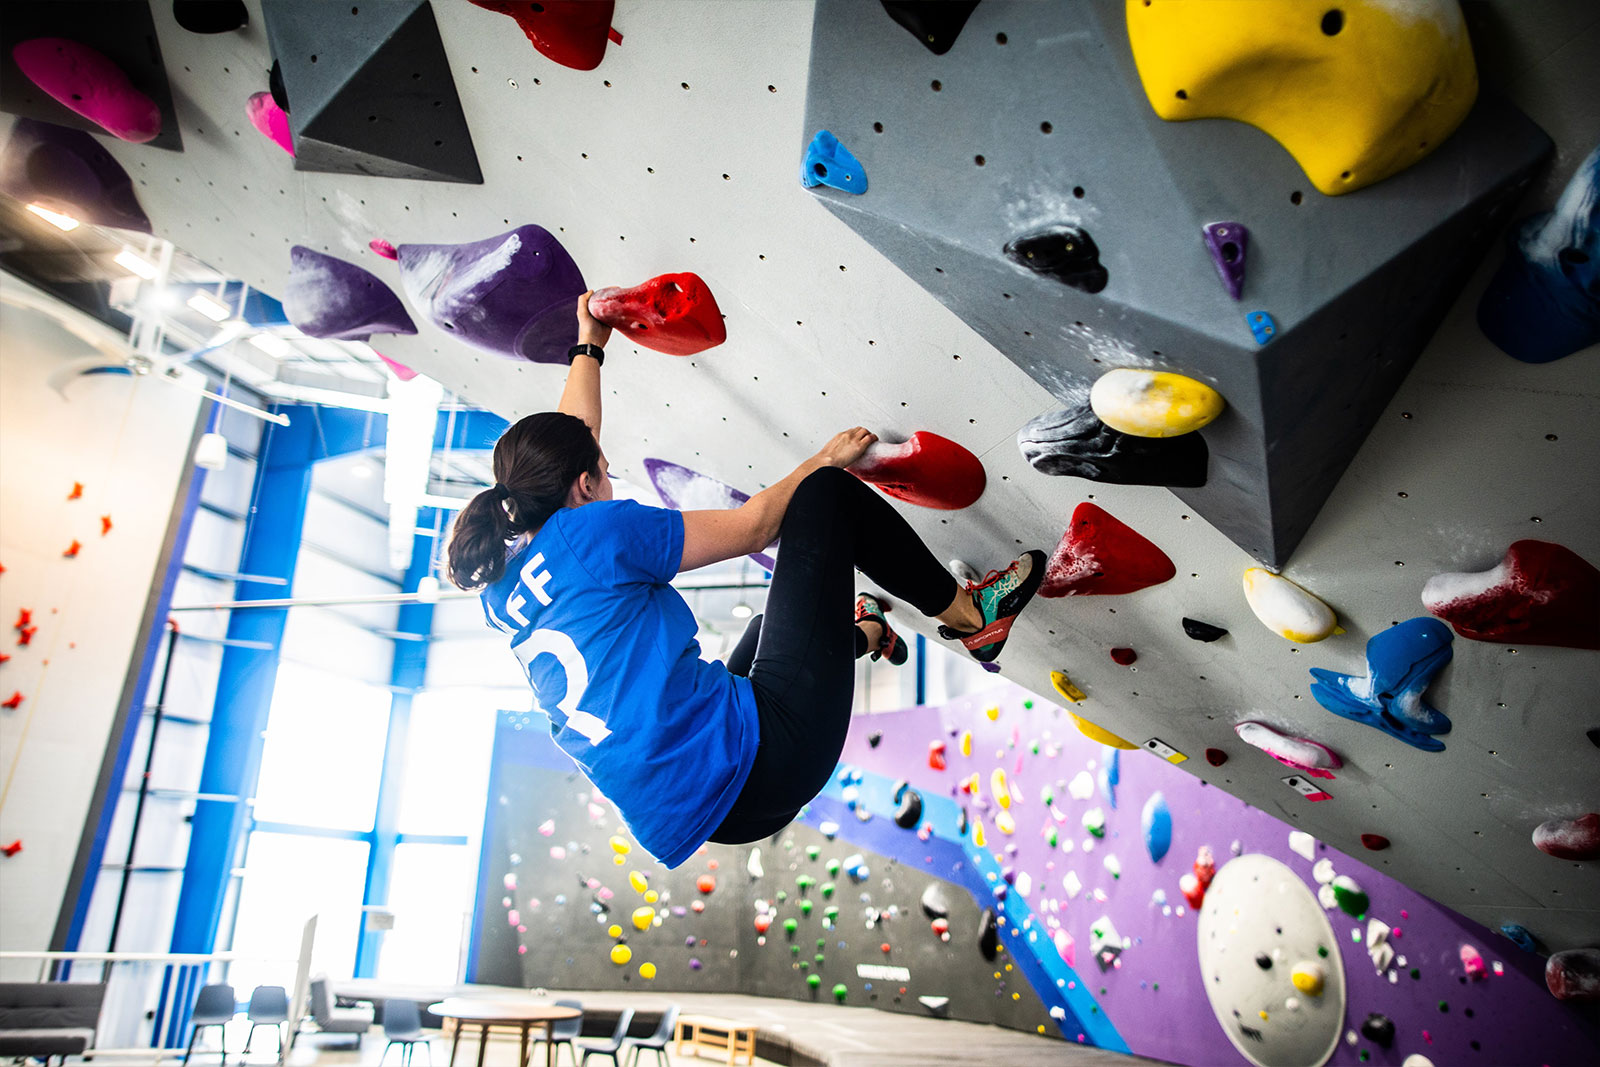 instructor bouldering on gray wall with colorful grips